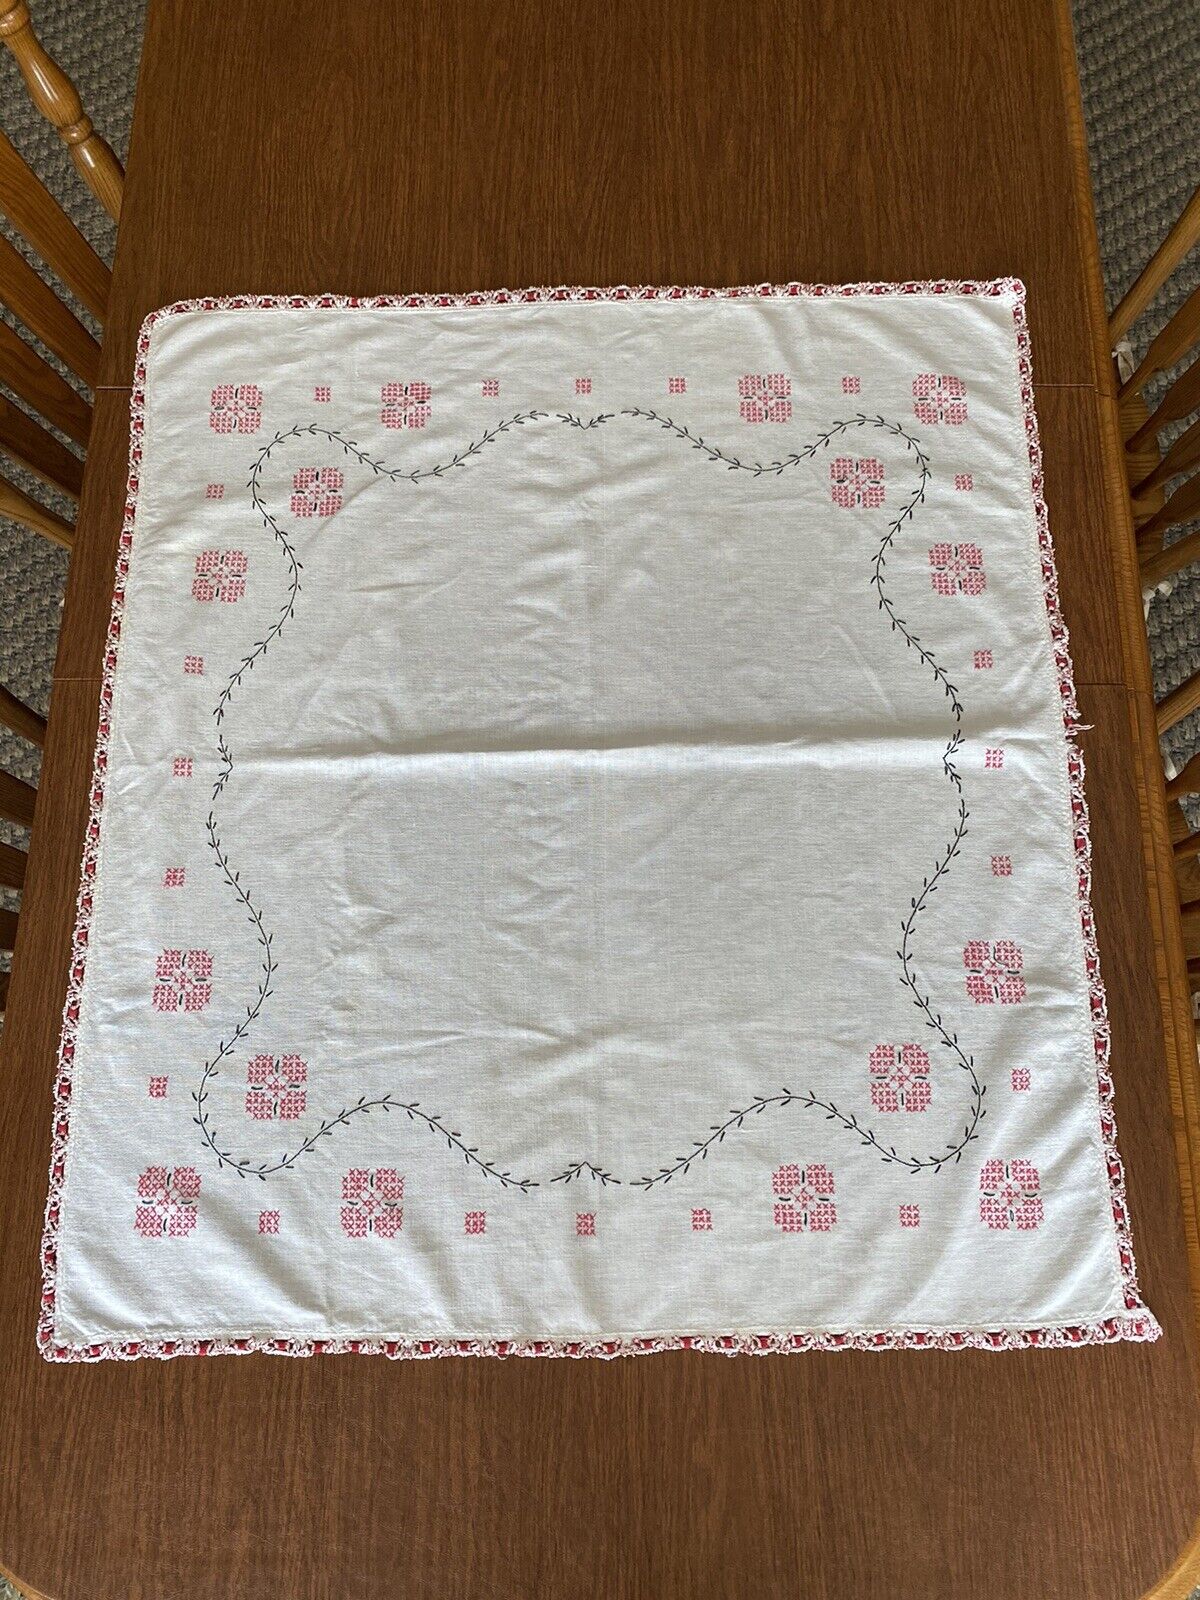 Vintage Linen Tablecloth Red/black Cross Stitch With Crochet Border 34x38”